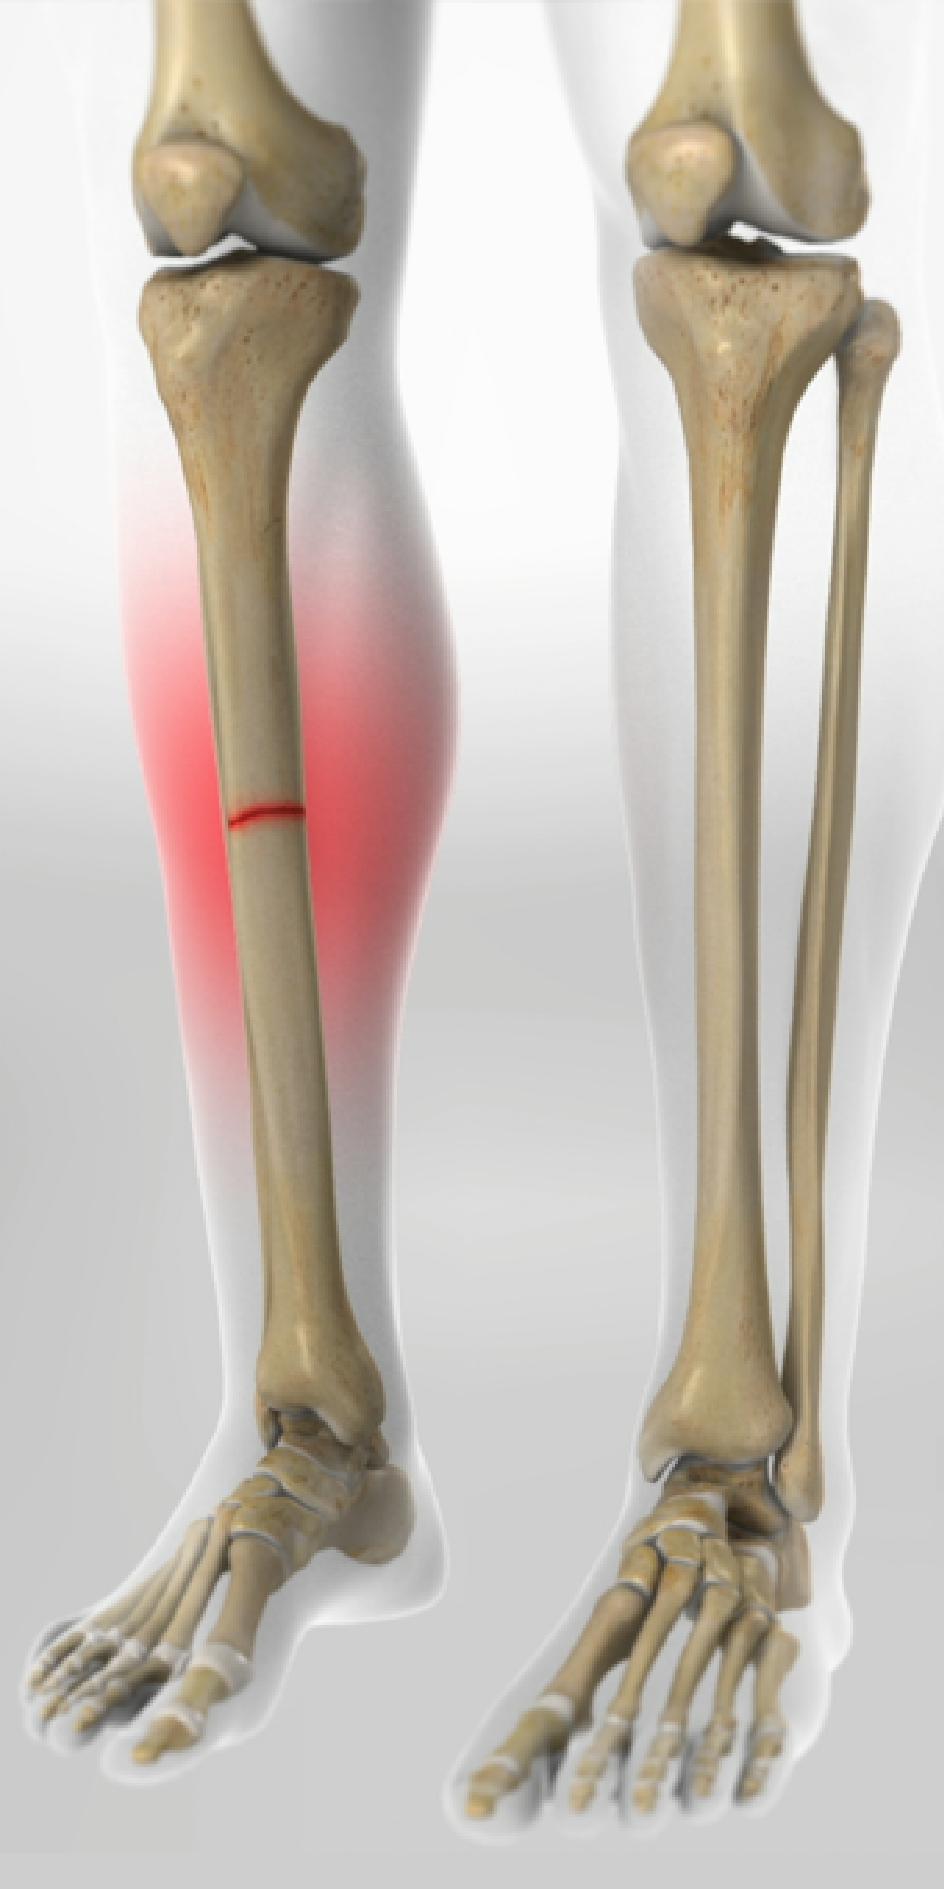 tibial stress fracture